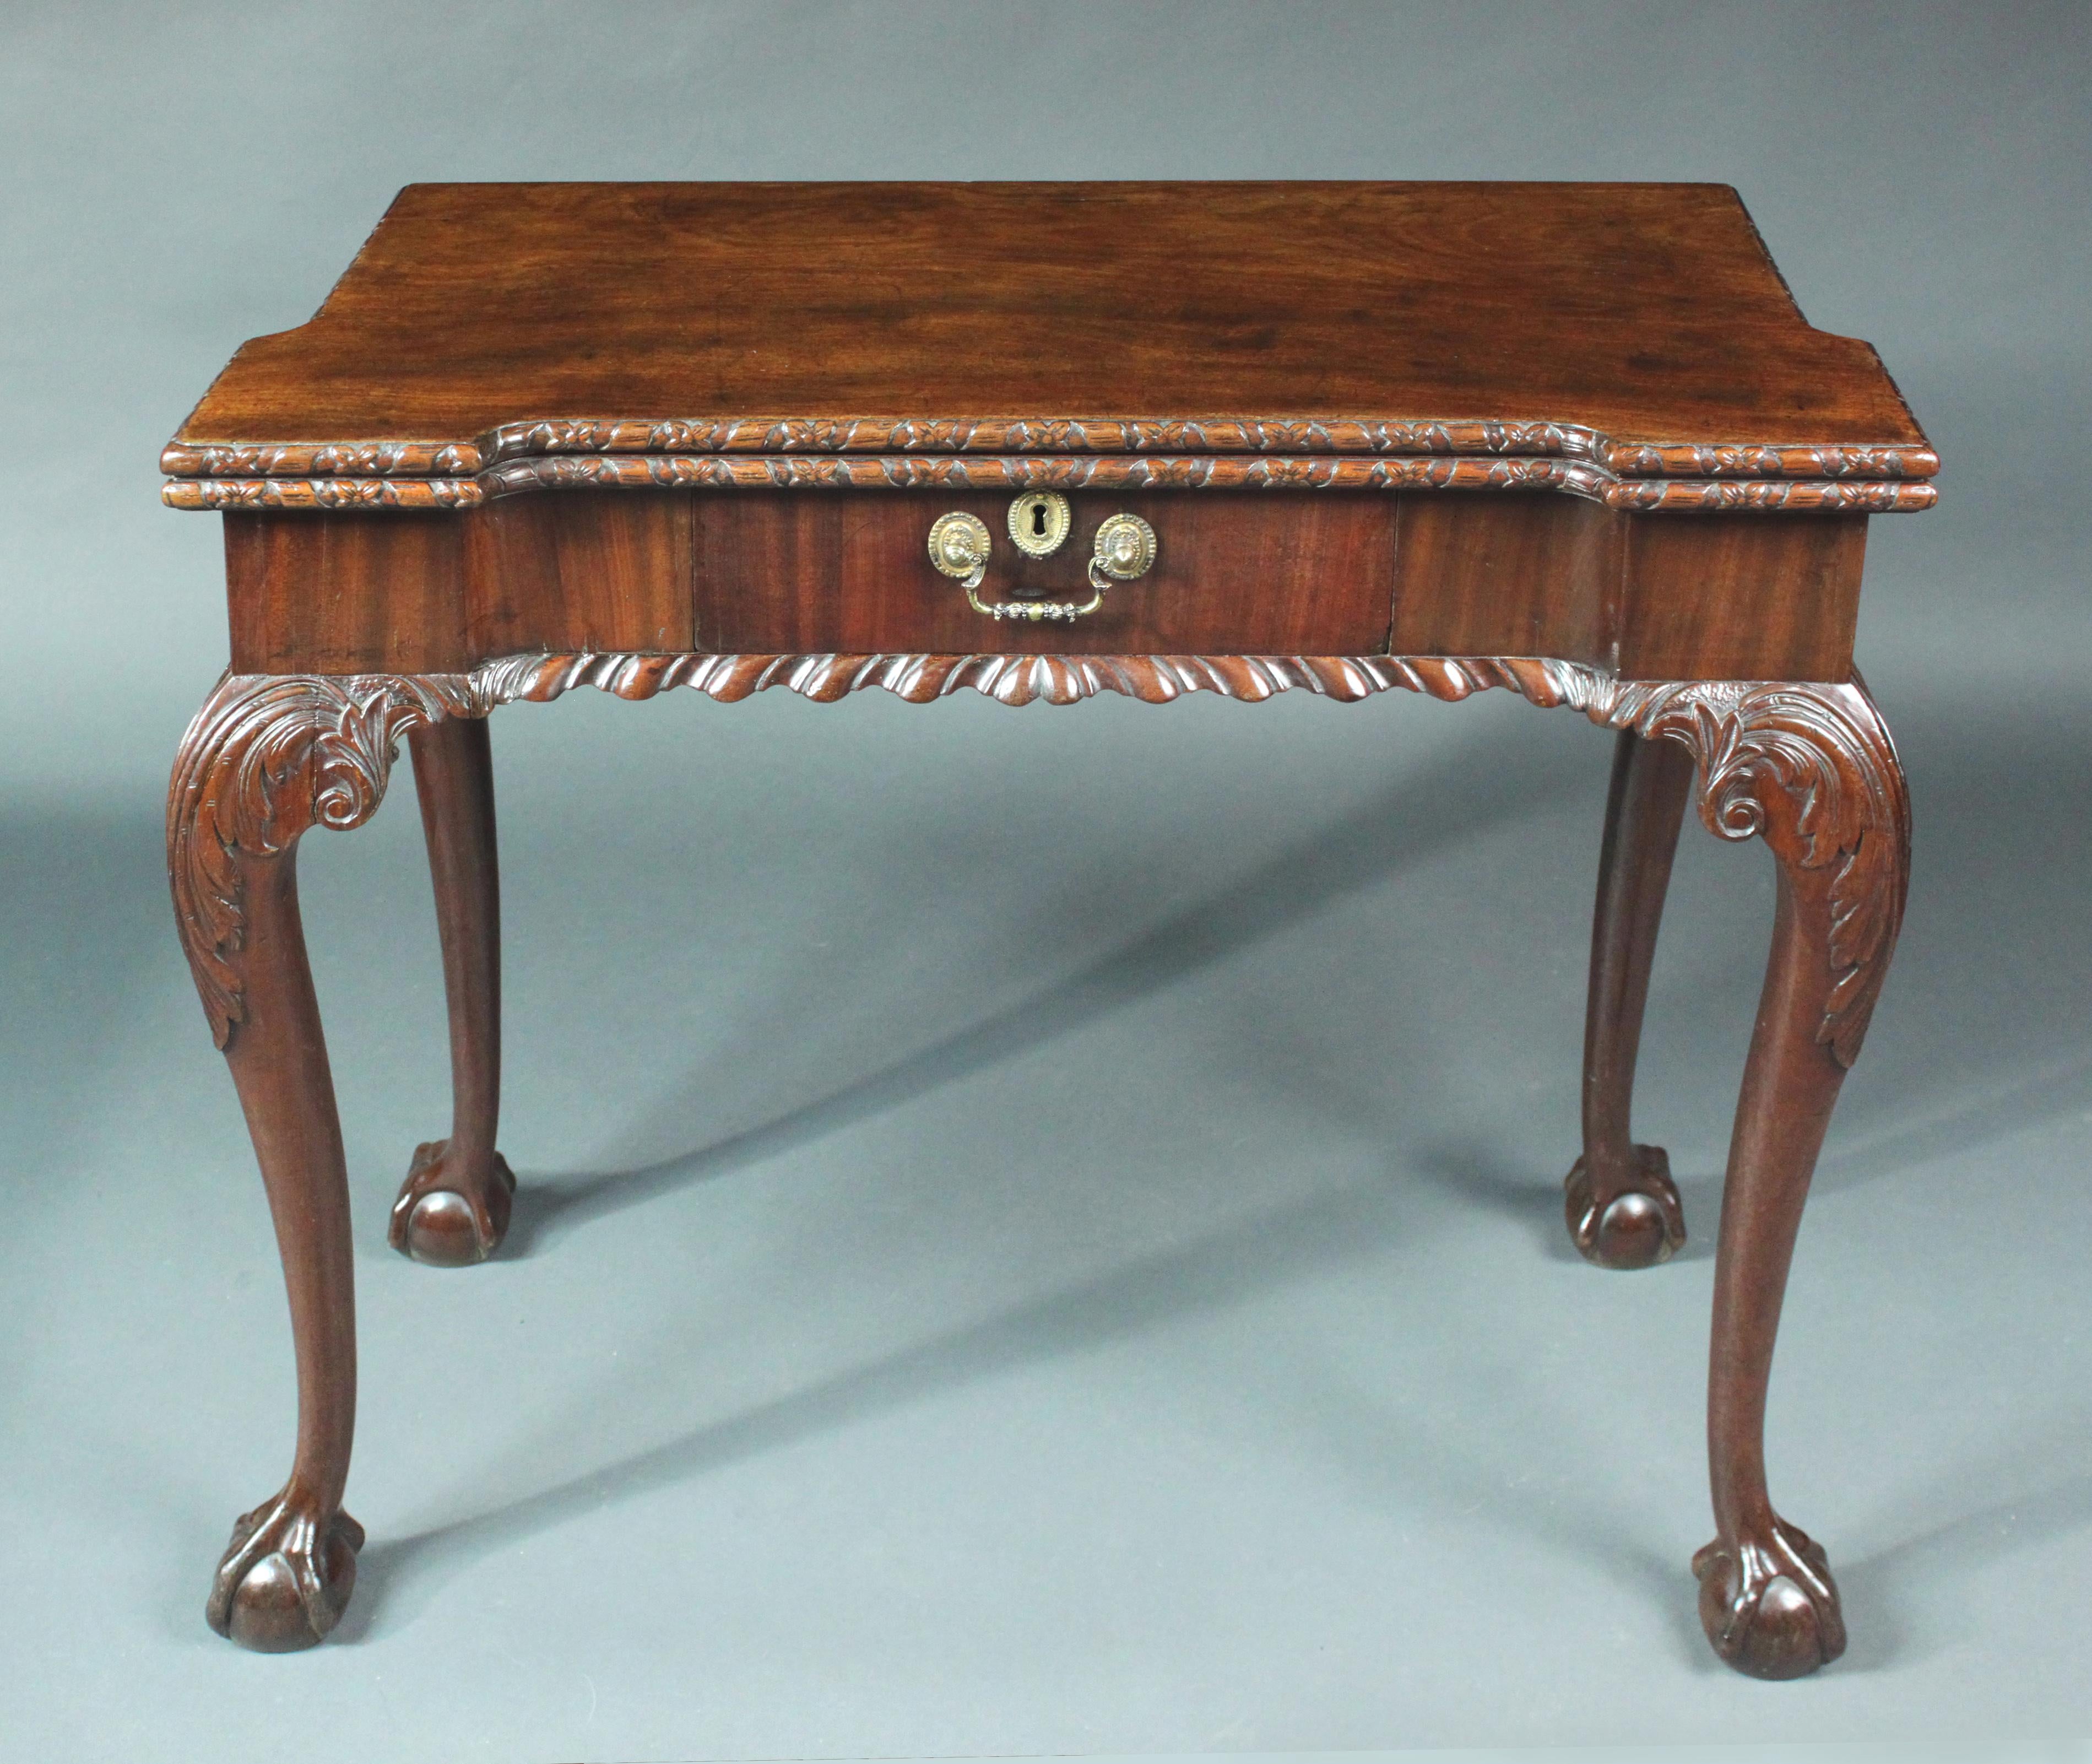 A George III mahogany cabriole leg card table with exceptional carved detail and rare small size. Secret compartment in the drawer and good original color and patina.
We will be fitting dark green baize.